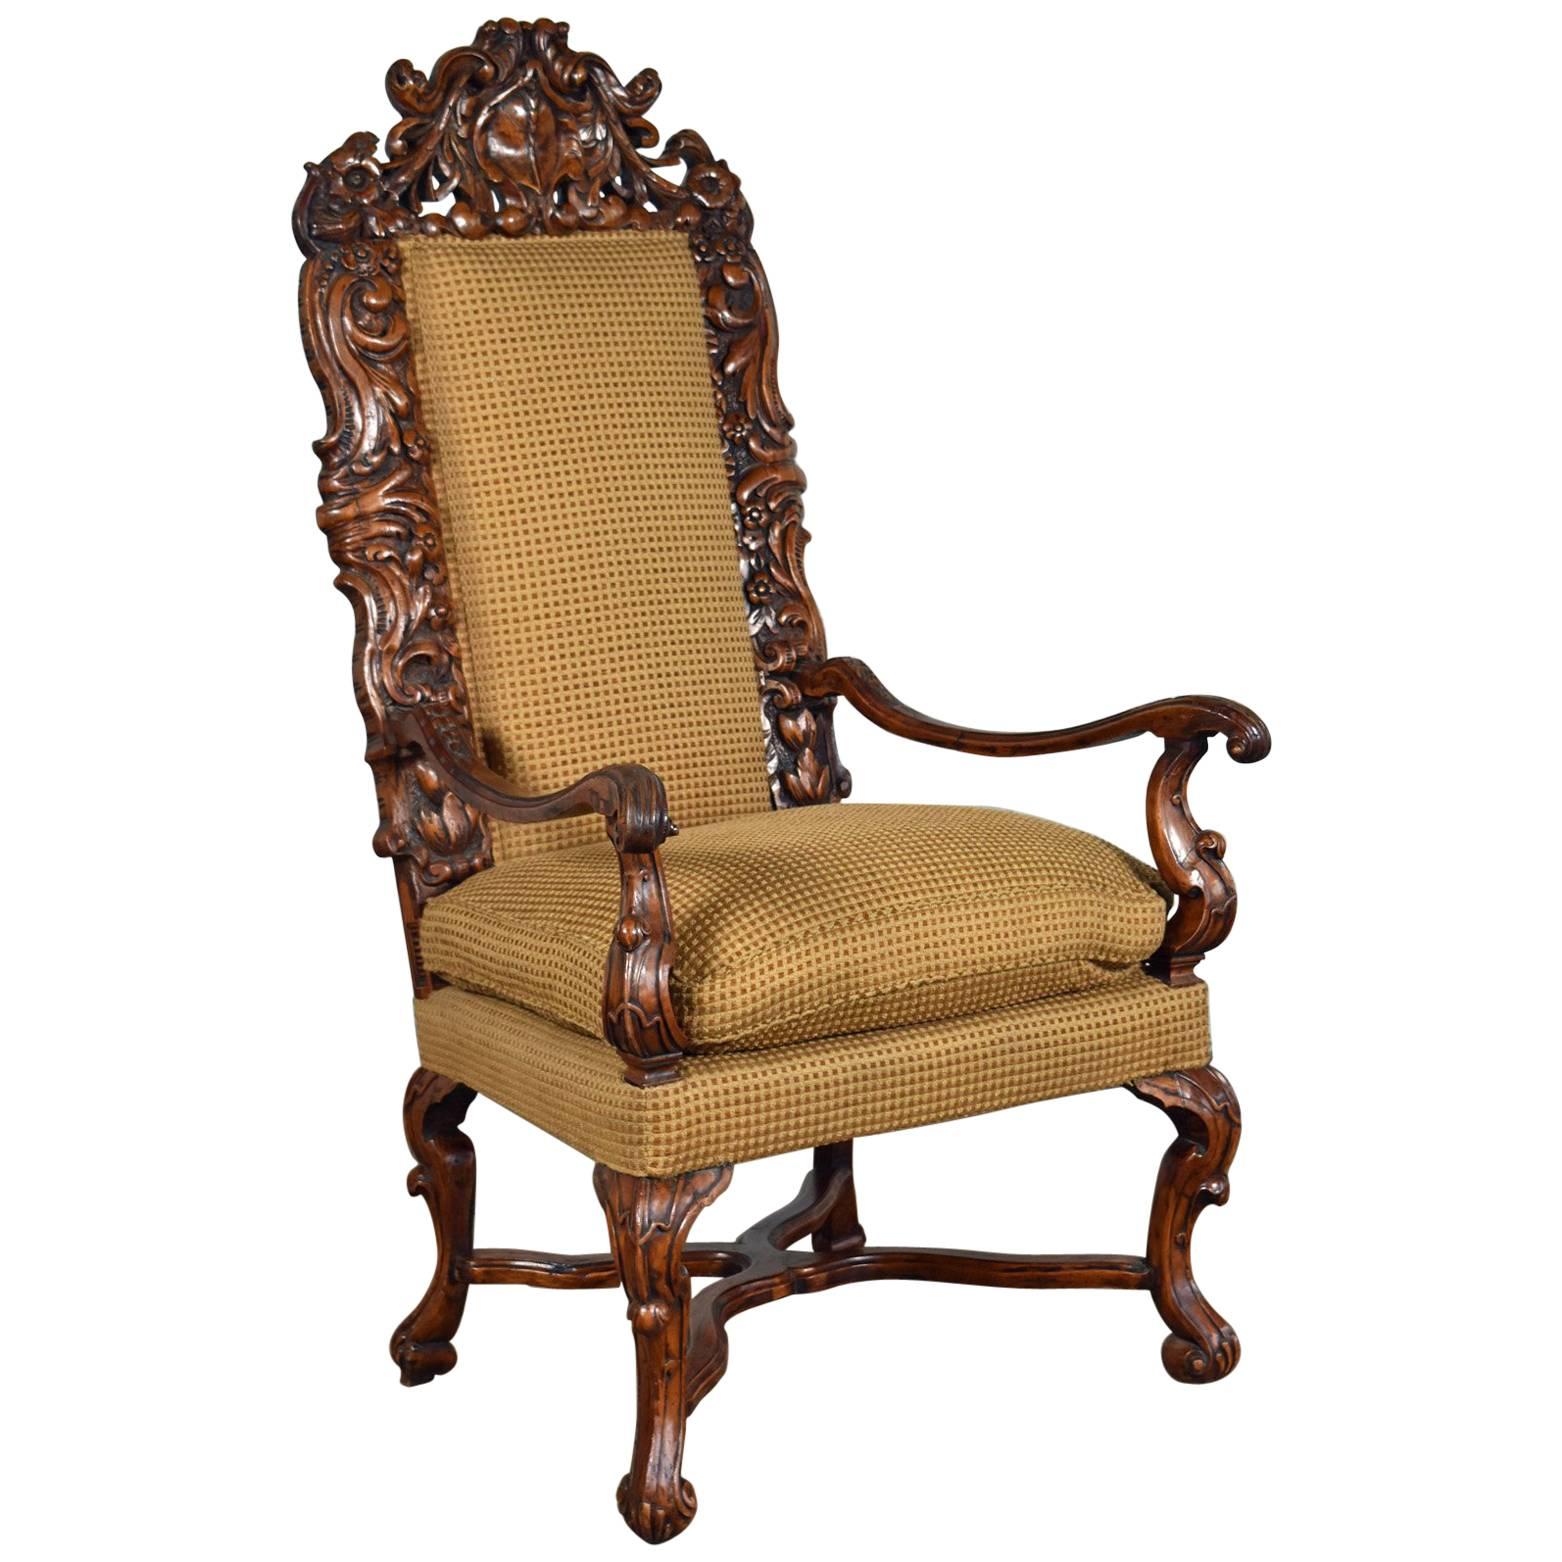 Early 18th Century Regence Northern French / Flemish Oversized Armchair